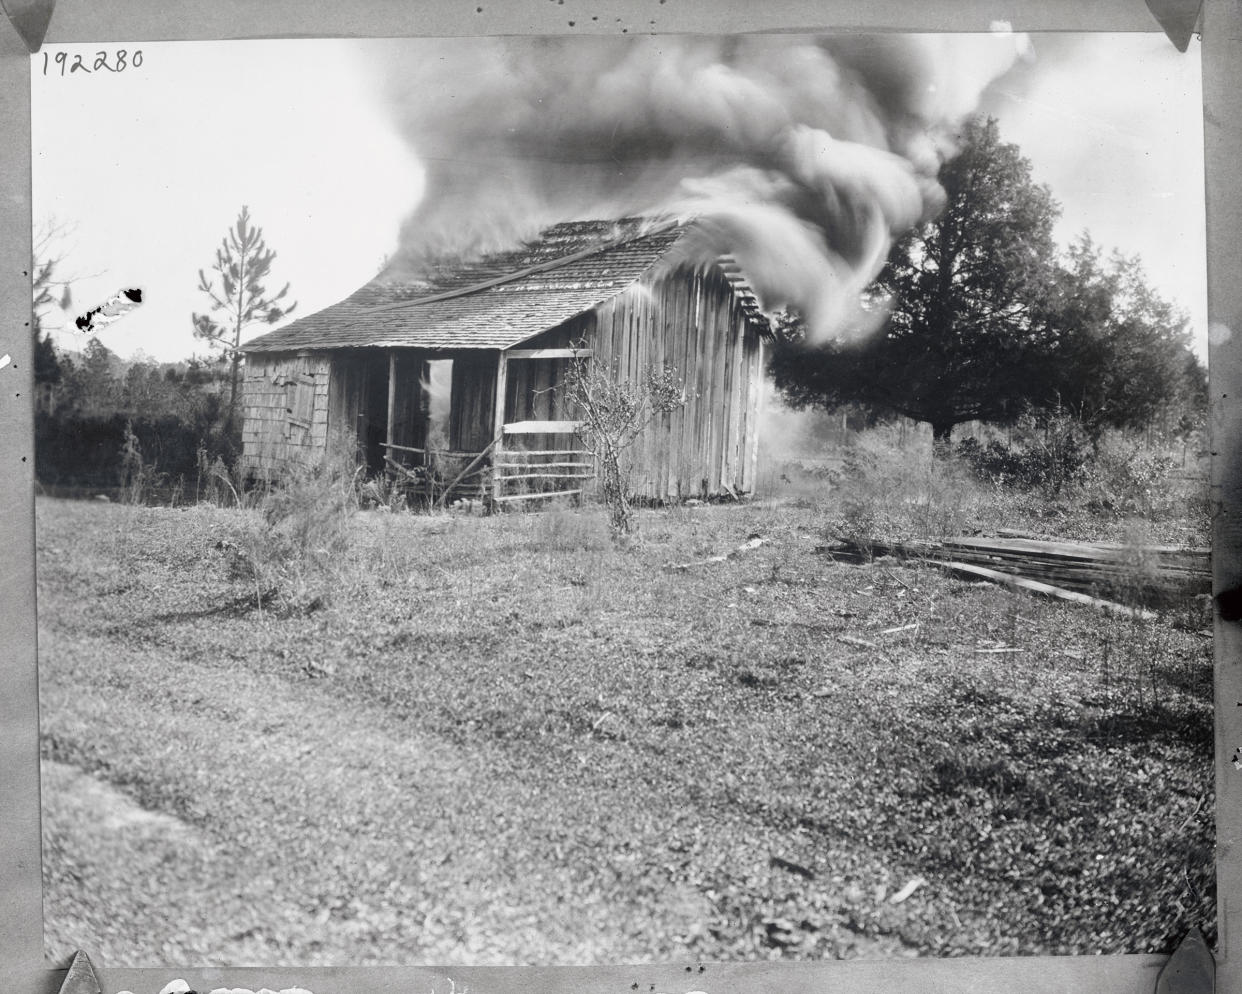 A home burns on Jan. 9, 1923, during a white mob’s attacks on the Black community of Rosewood, Fla.